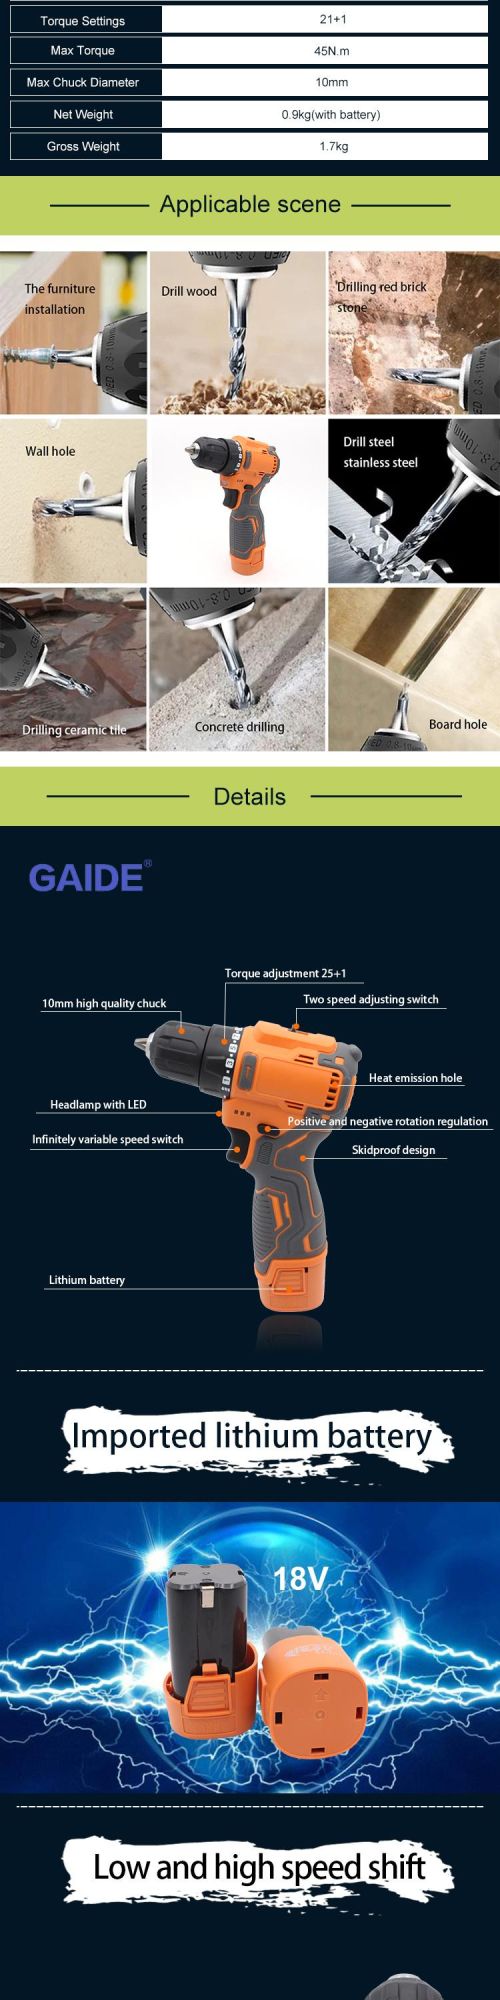 Gaide Made in China Cheap Chargeable Electric Cordless Drill